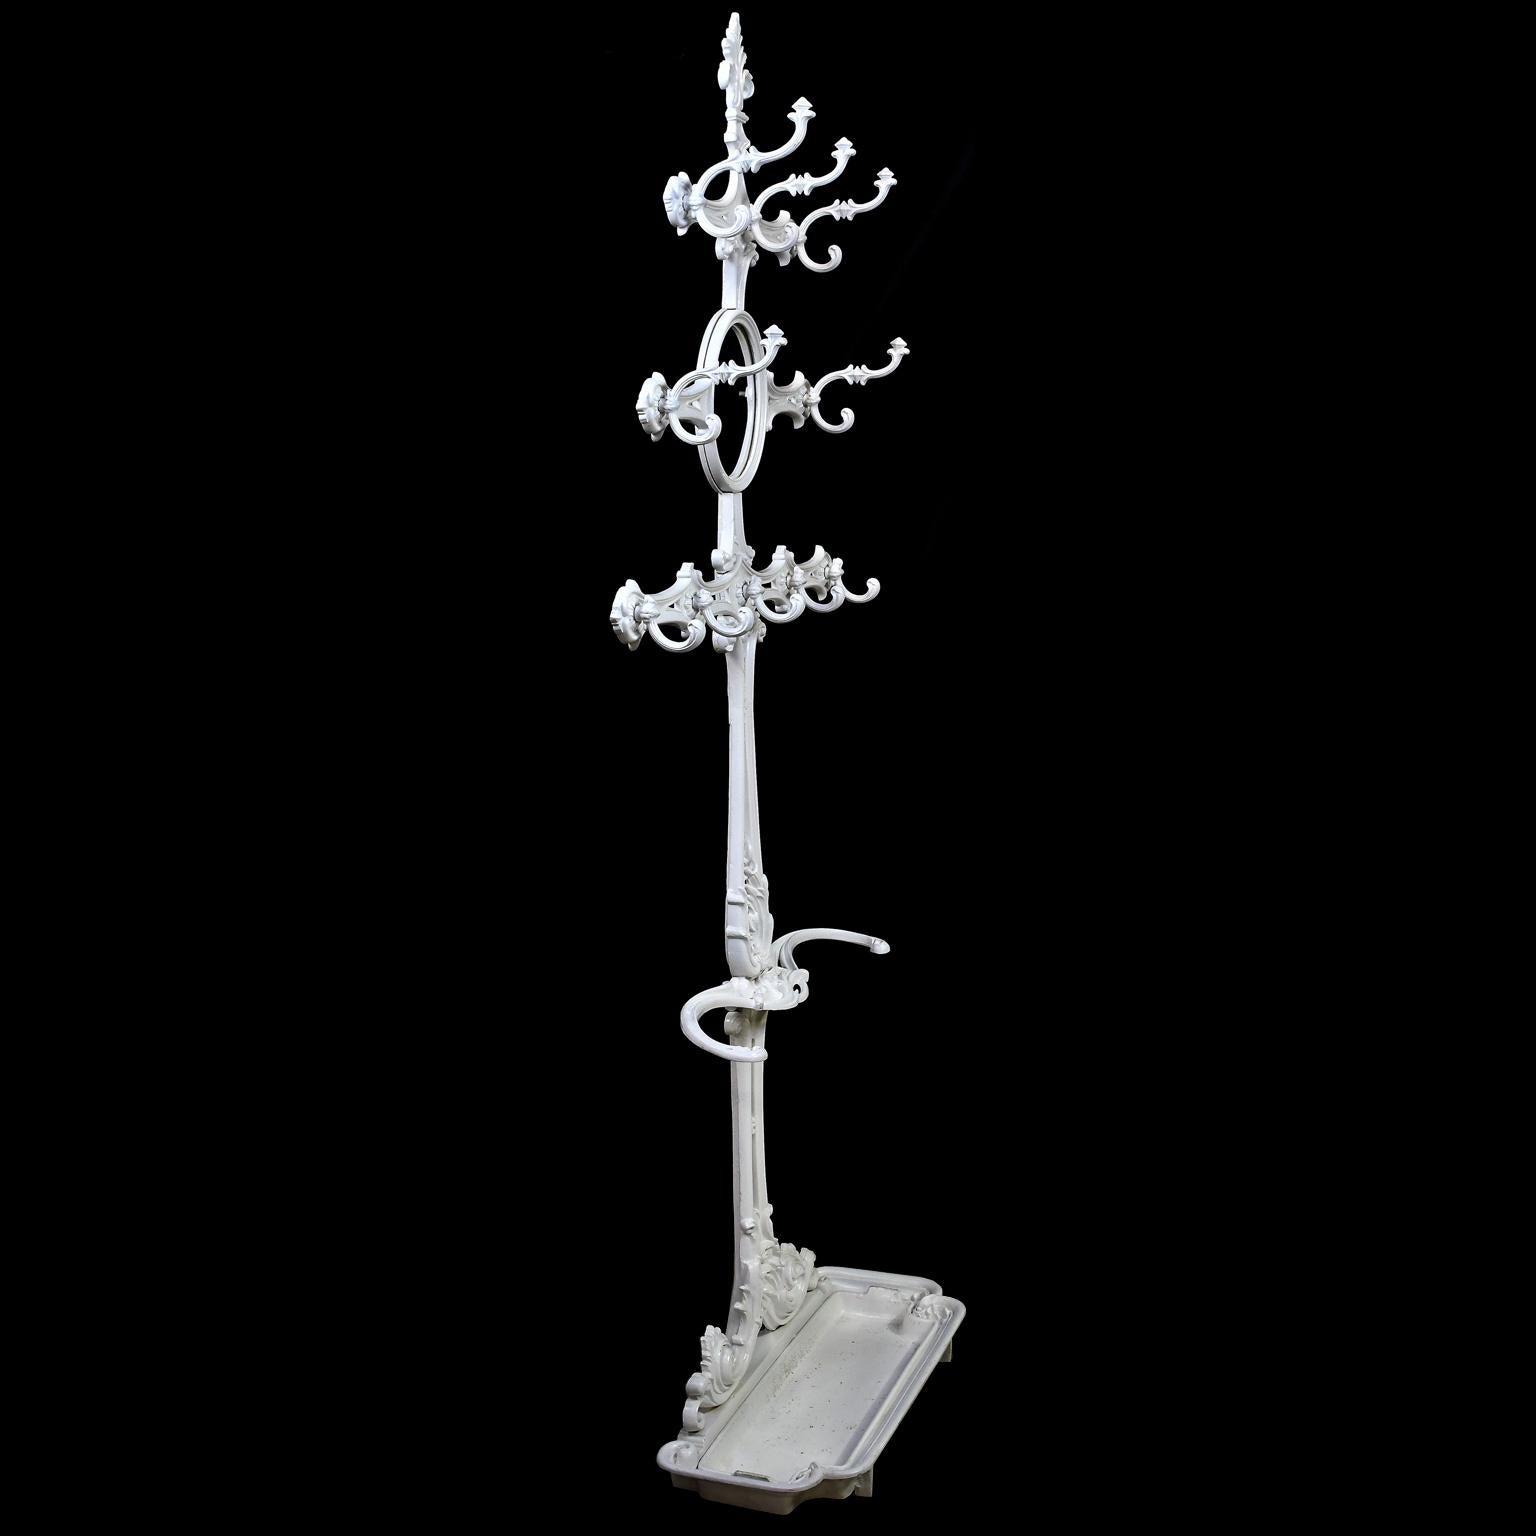 Victorian Cast Iron Coat or Hat Rack with Umbrella Stand, circa 1870 In Good Condition For Sale In Miami, FL